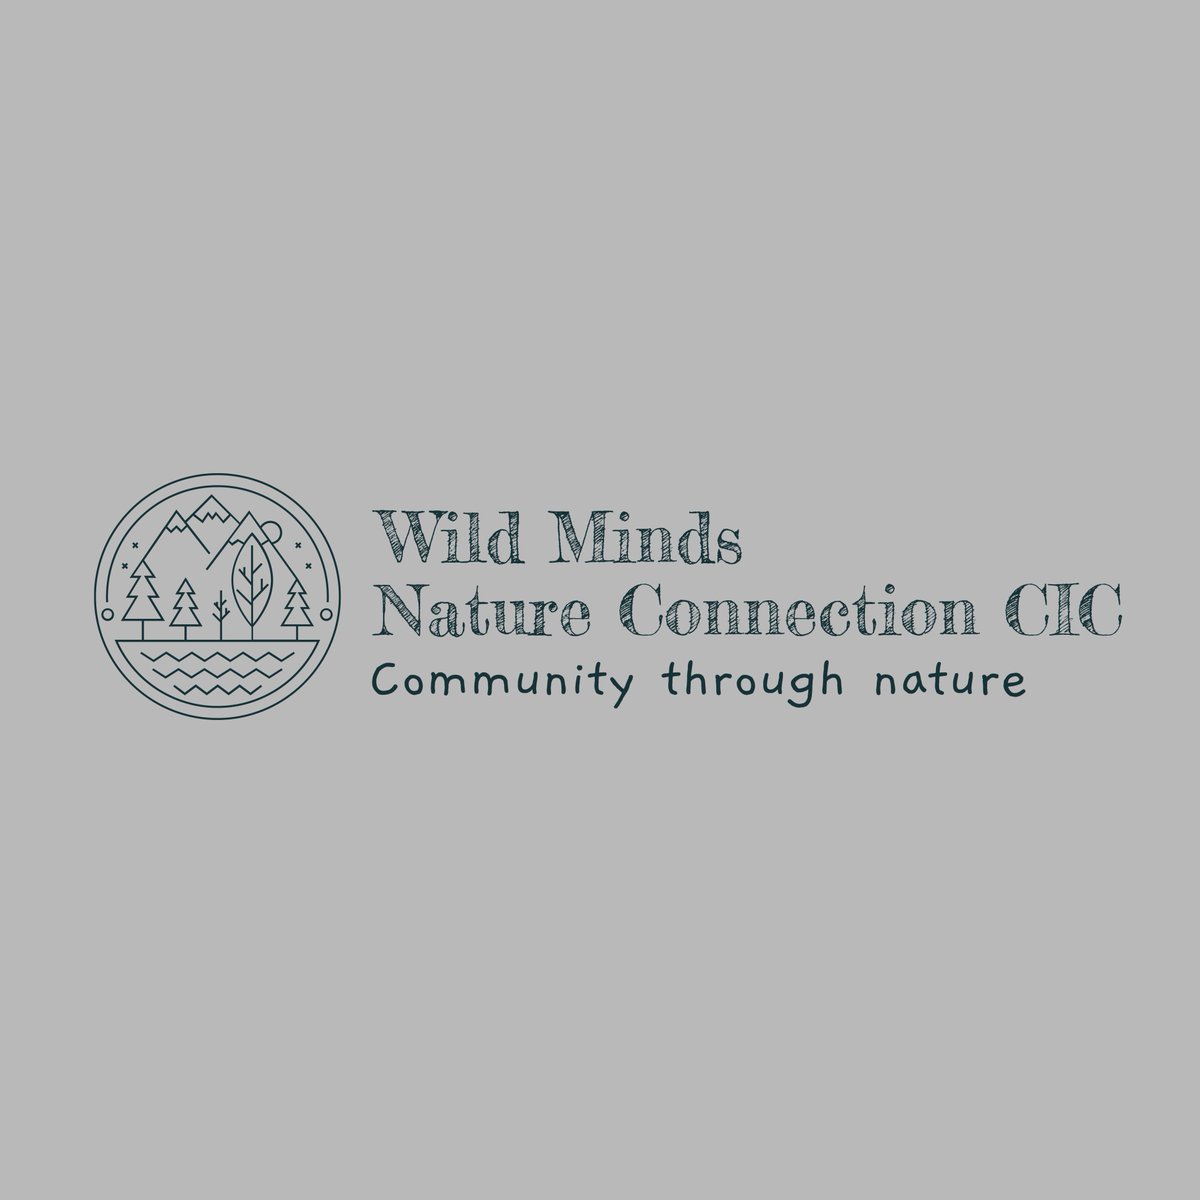 📣We are extremely excited to announce the launch of our Community Interest Company.📣 Wild Minds Nature Connection CIC🌳has been created to aid our mission to get as many people as possible connecting with nature for the betterment of their mental & physical health & wellbeing.